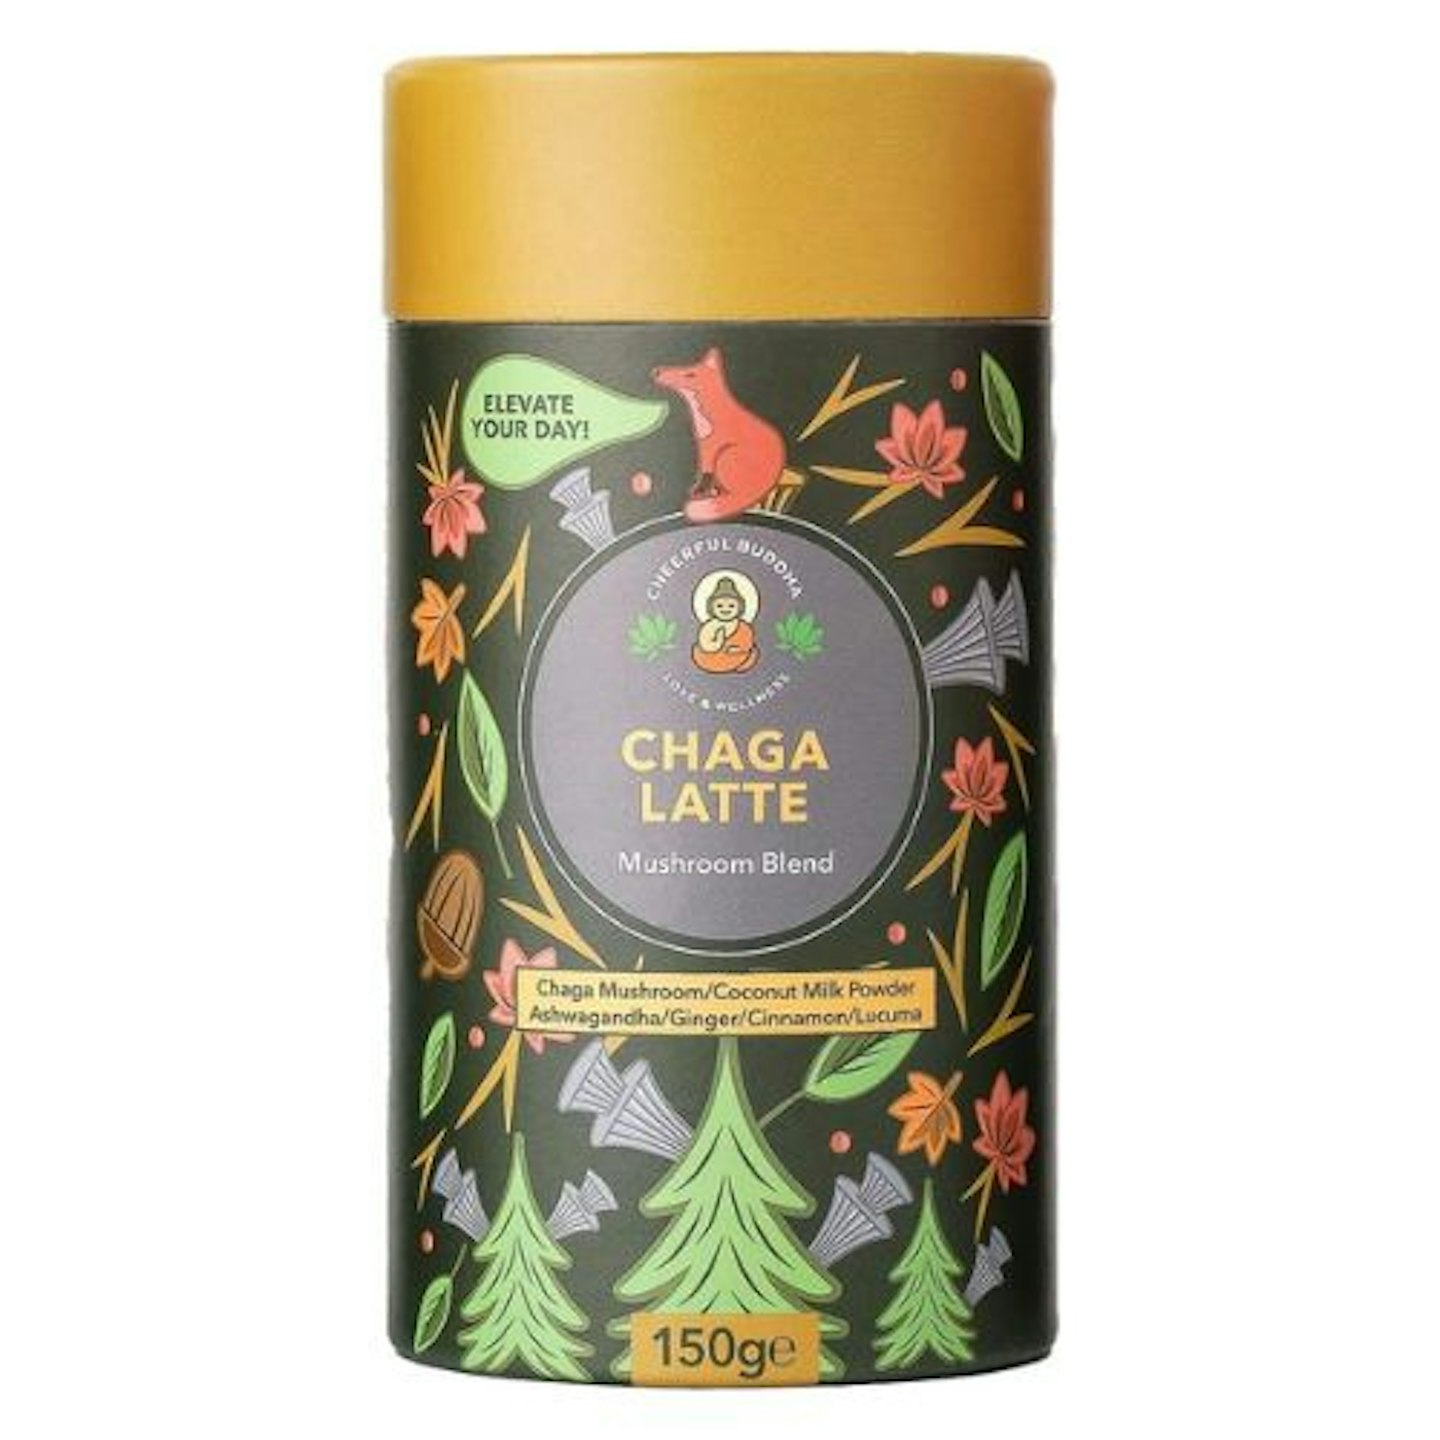 Cheerful Buddha Superfood Chaga Latte - A Delicious Alternative to Coffee | Caffeine-free | Boosted with superfoods | No Jitters | No Sugar |150g